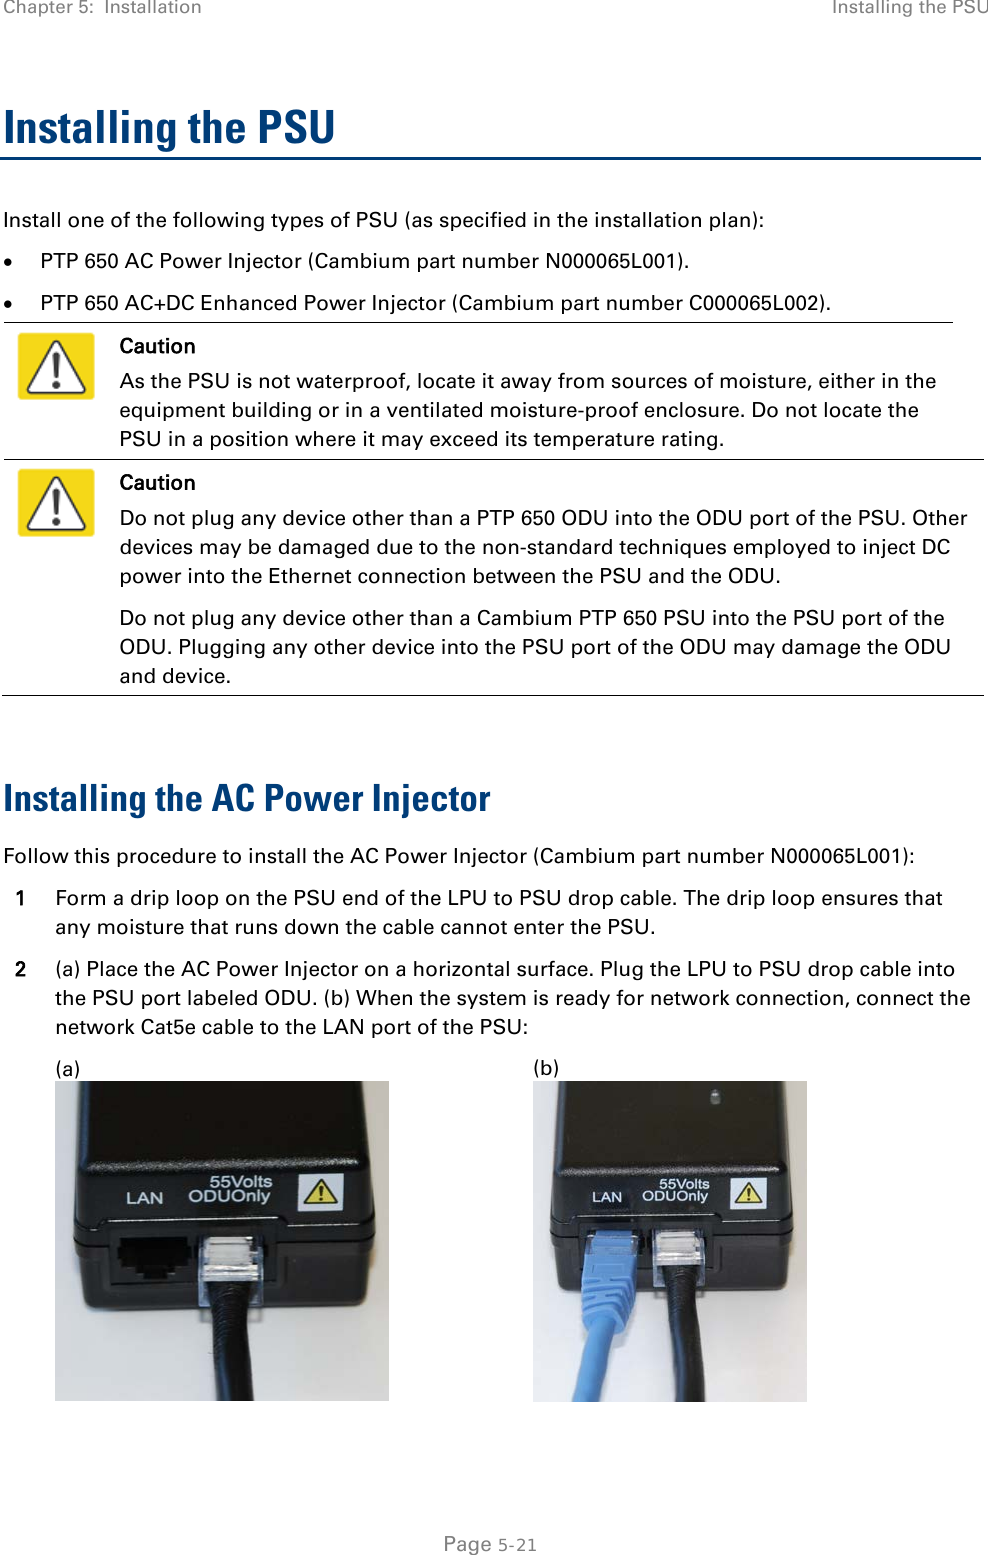 Chapter 5:  Installation Installing the PSU  Installing the PSU Install one of the following types of PSU (as specified in the installation plan): • PTP 650 AC Power Injector (Cambium part number N000065L001). • PTP 650 AC+DC Enhanced Power Injector (Cambium part number C000065L002).  Caution As the PSU is not waterproof, locate it away from sources of moisture, either in the equipment building or in a ventilated moisture-proof enclosure. Do not locate the PSU in a position where it may exceed its temperature rating.  Caution Do not plug any device other than a PTP 650 ODU into the ODU port of the PSU. Other devices may be damaged due to the non-standard techniques employed to inject DC power into the Ethernet connection between the PSU and the ODU. Do not plug any device other than a Cambium PTP 650 PSU into the PSU port of the ODU. Plugging any other device into the PSU port of the ODU may damage the ODU and device.  Installing the AC Power Injector Follow this procedure to install the AC Power Injector (Cambium part number N000065L001): 1 Form a drip loop on the PSU end of the LPU to PSU drop cable. The drip loop ensures that any moisture that runs down the cable cannot enter the PSU. 2 (a) Place the AC Power Injector on a horizontal surface. Plug the LPU to PSU drop cable into the PSU port labeled ODU. (b) When the system is ready for network connection, connect the network Cat5e cable to the LAN port of the PSU:   (a)  (b)   Page 5-21 